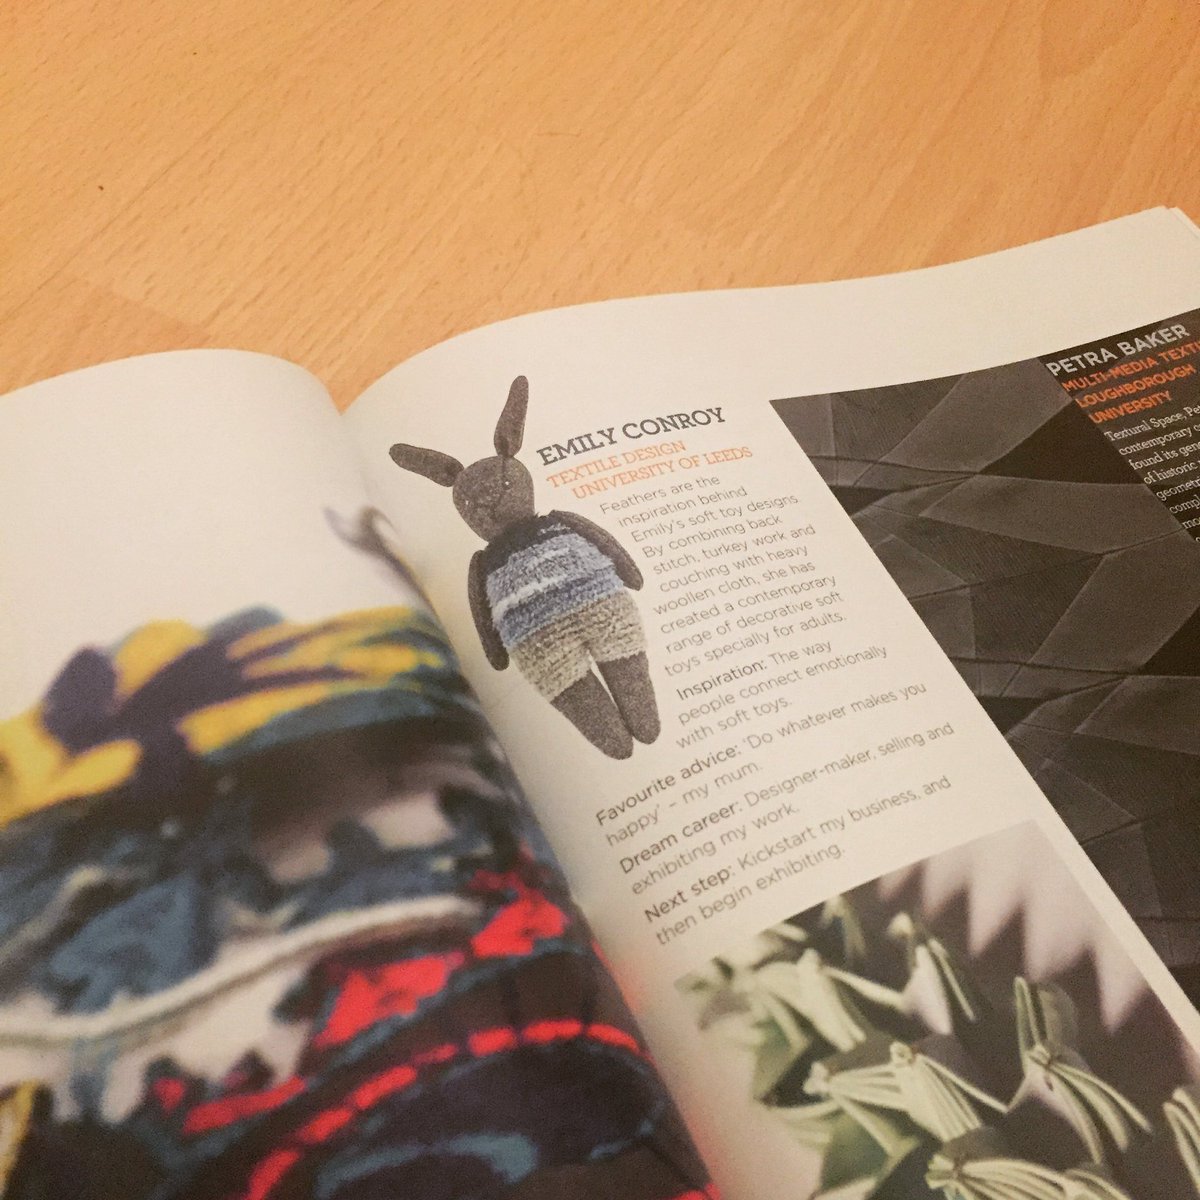 My work featured in Embroidery Magazine 'The Graduates 2016' section - sept/oct edition 🐰#embroiderymagazine